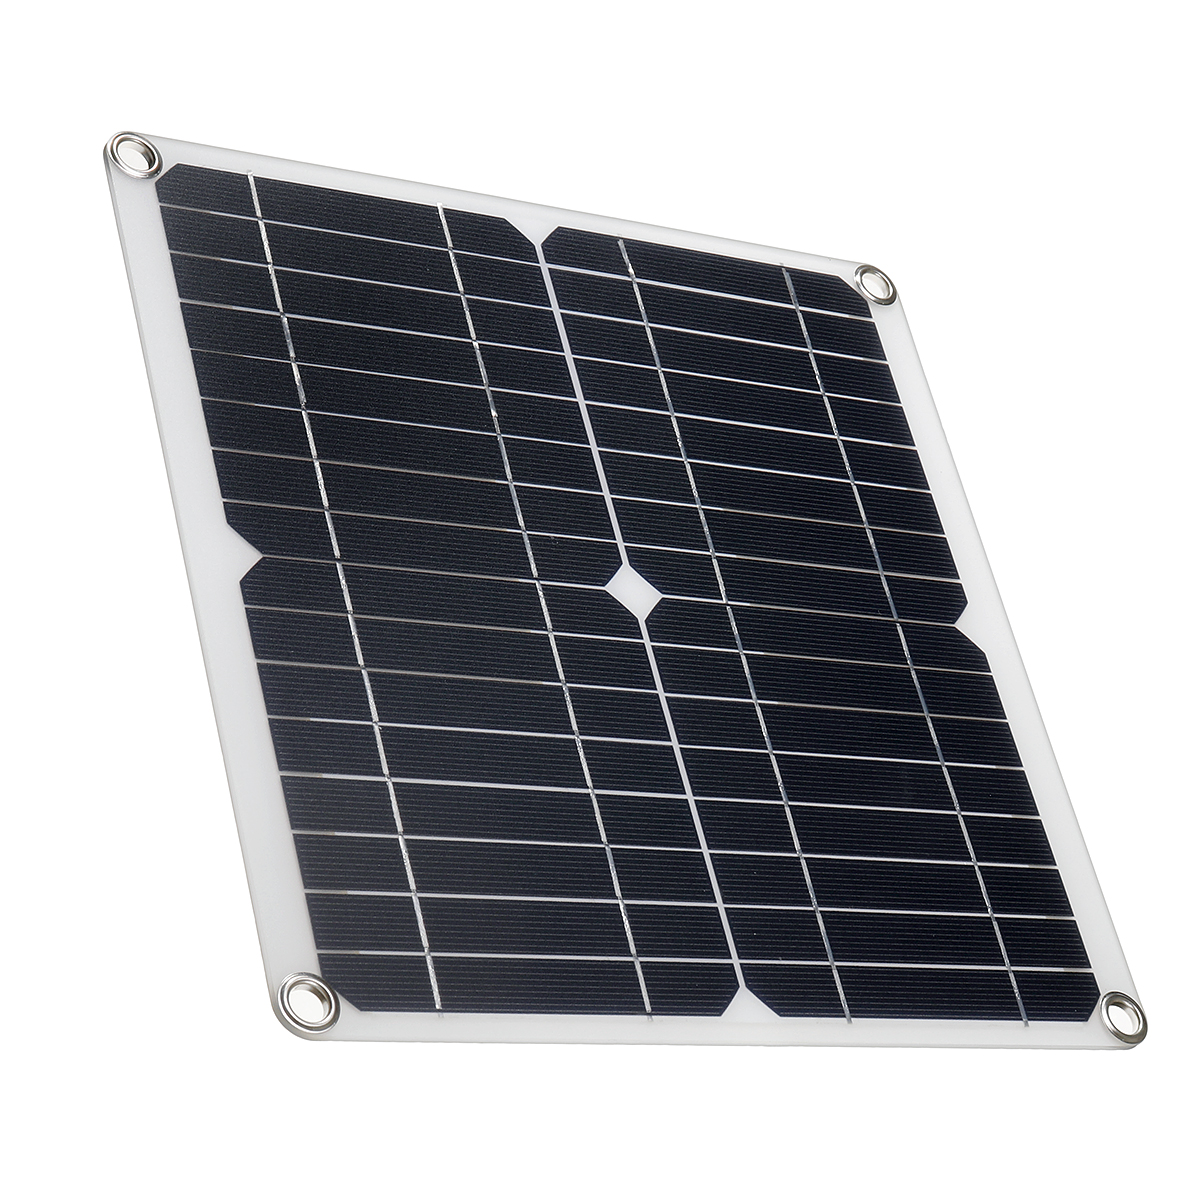 20W-Solar-Panel-Battery-Charger-Monocrystalline-High-Conversion-Rate-Solar-Power-Kit-1729368